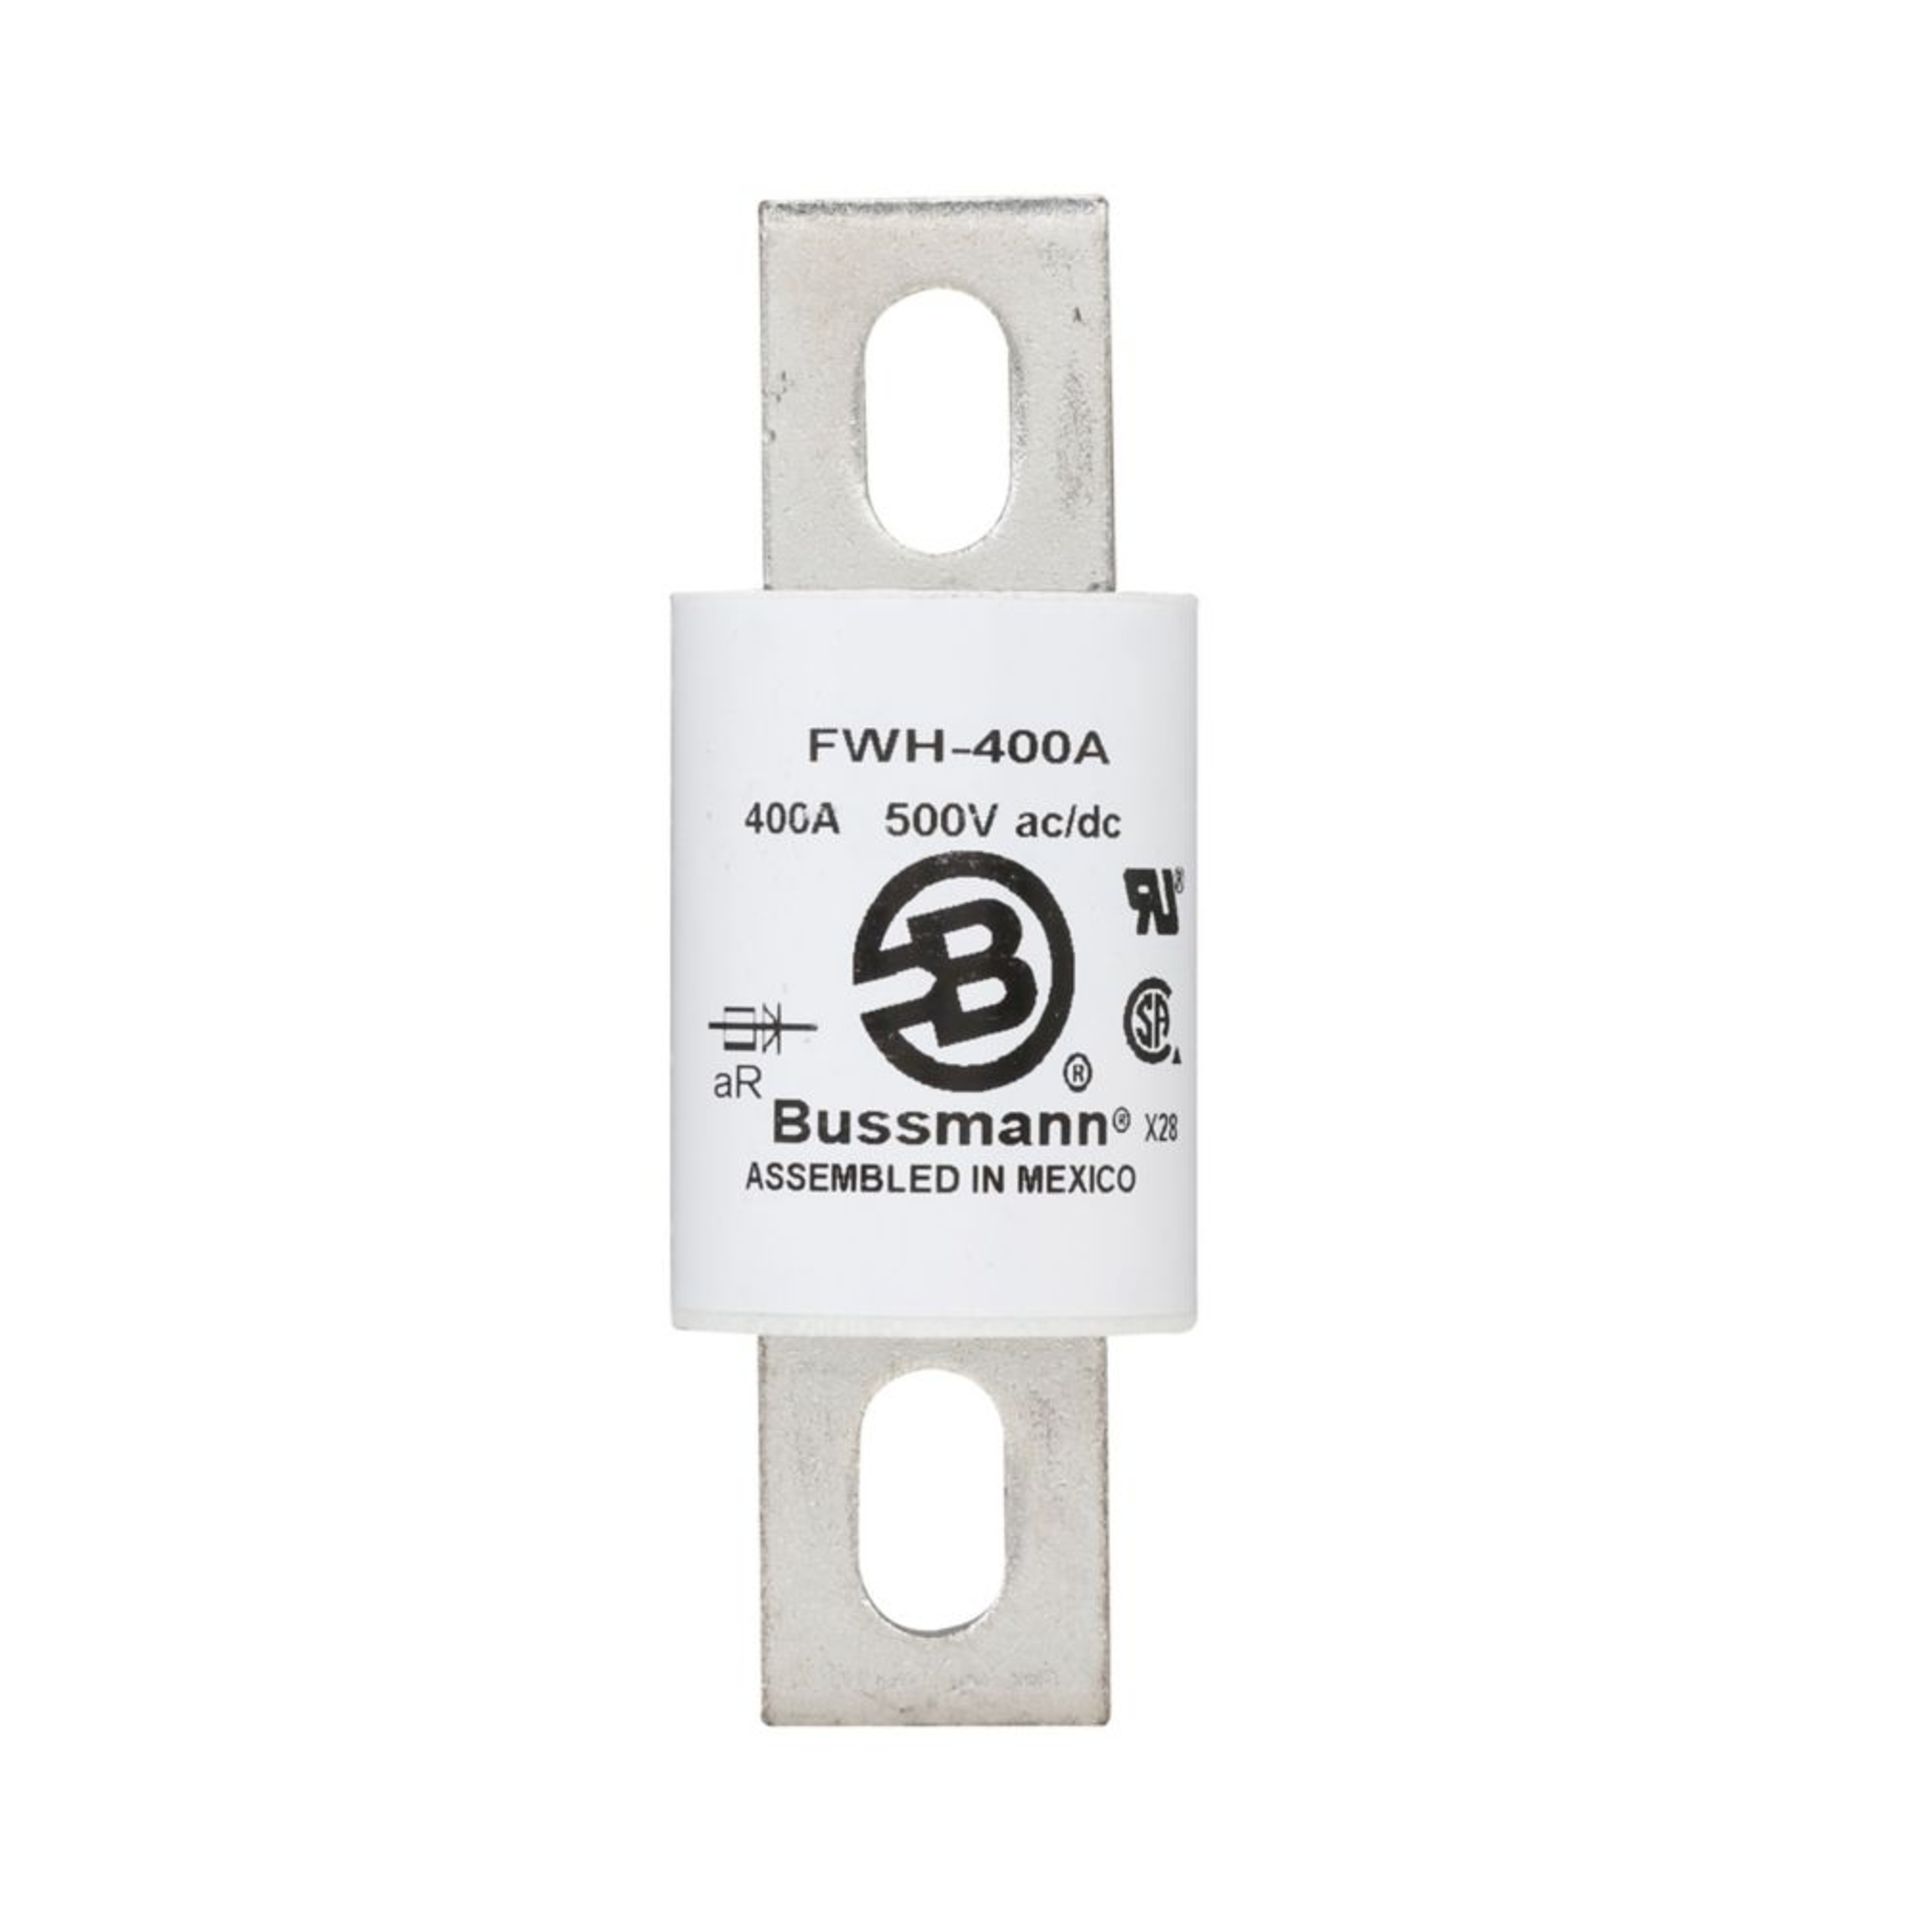 8 x Bussman FWH-400A Fast-Acting Fuse Links - 400A, 500VDC / VAC, 50kA at 500VDC - New - RRP £980 - Image 2 of 3